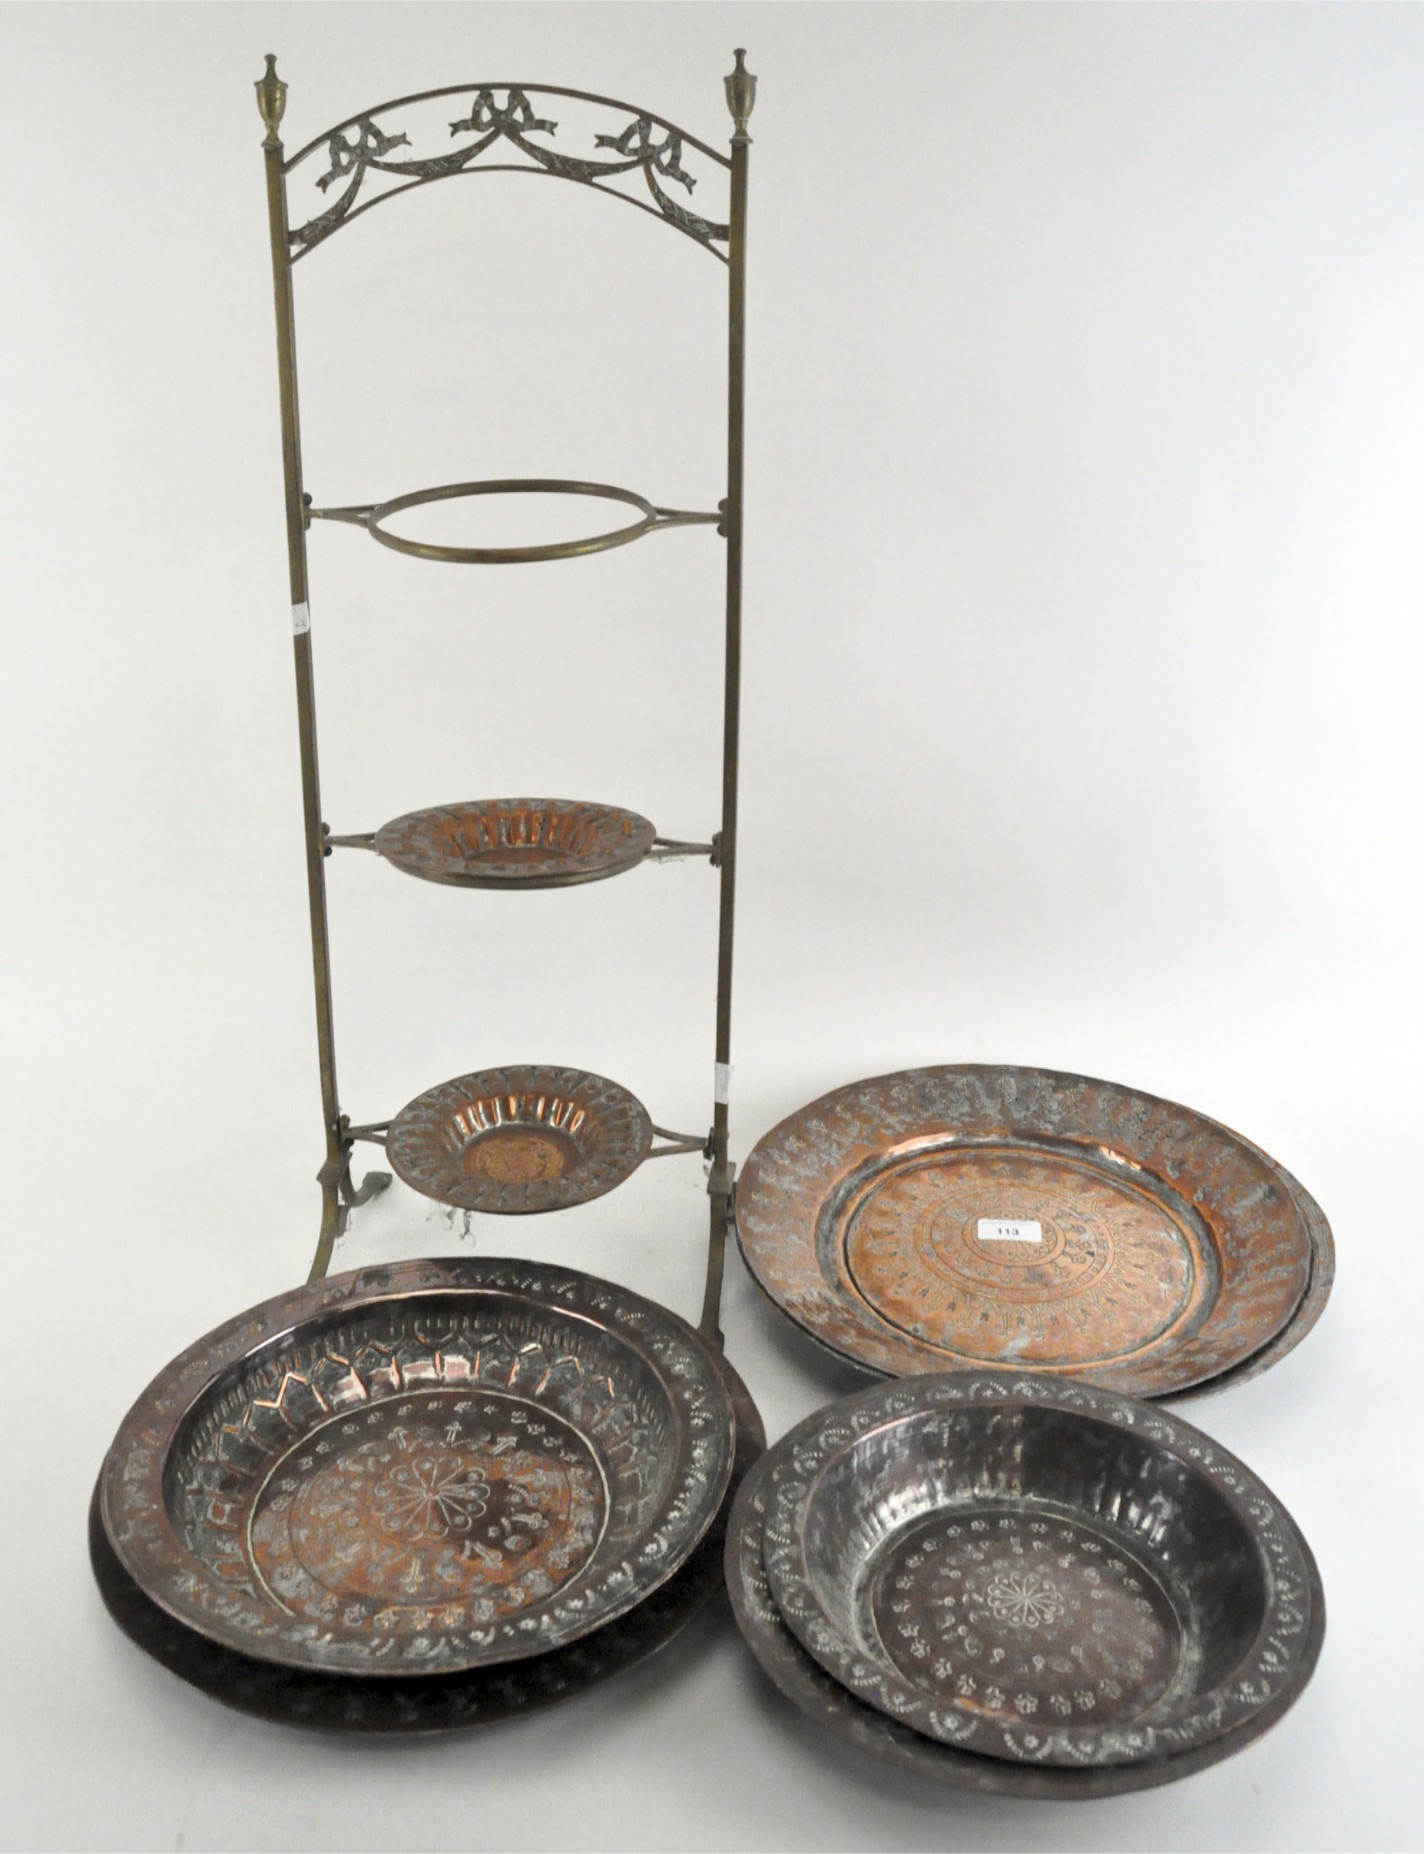 A three-tier plate stand with a metal frame together with a selection of engraved copper plates